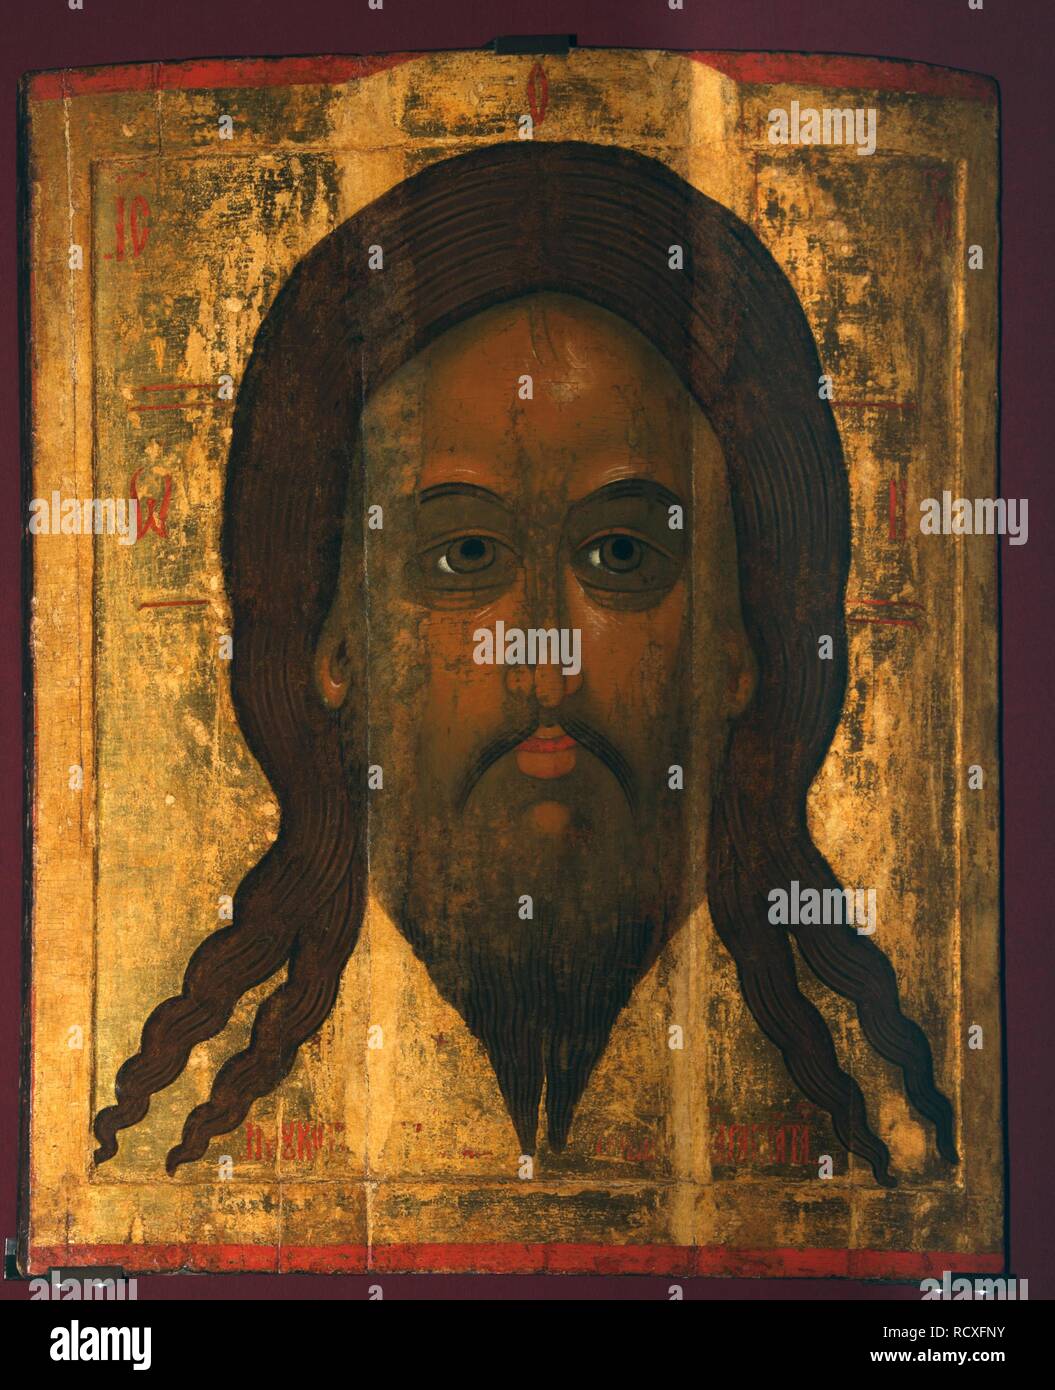 Holy Mandylion (The Vernicle). Museum: State Tretyakov Gallery, Moscow. Author: Serapion. Stock Photo